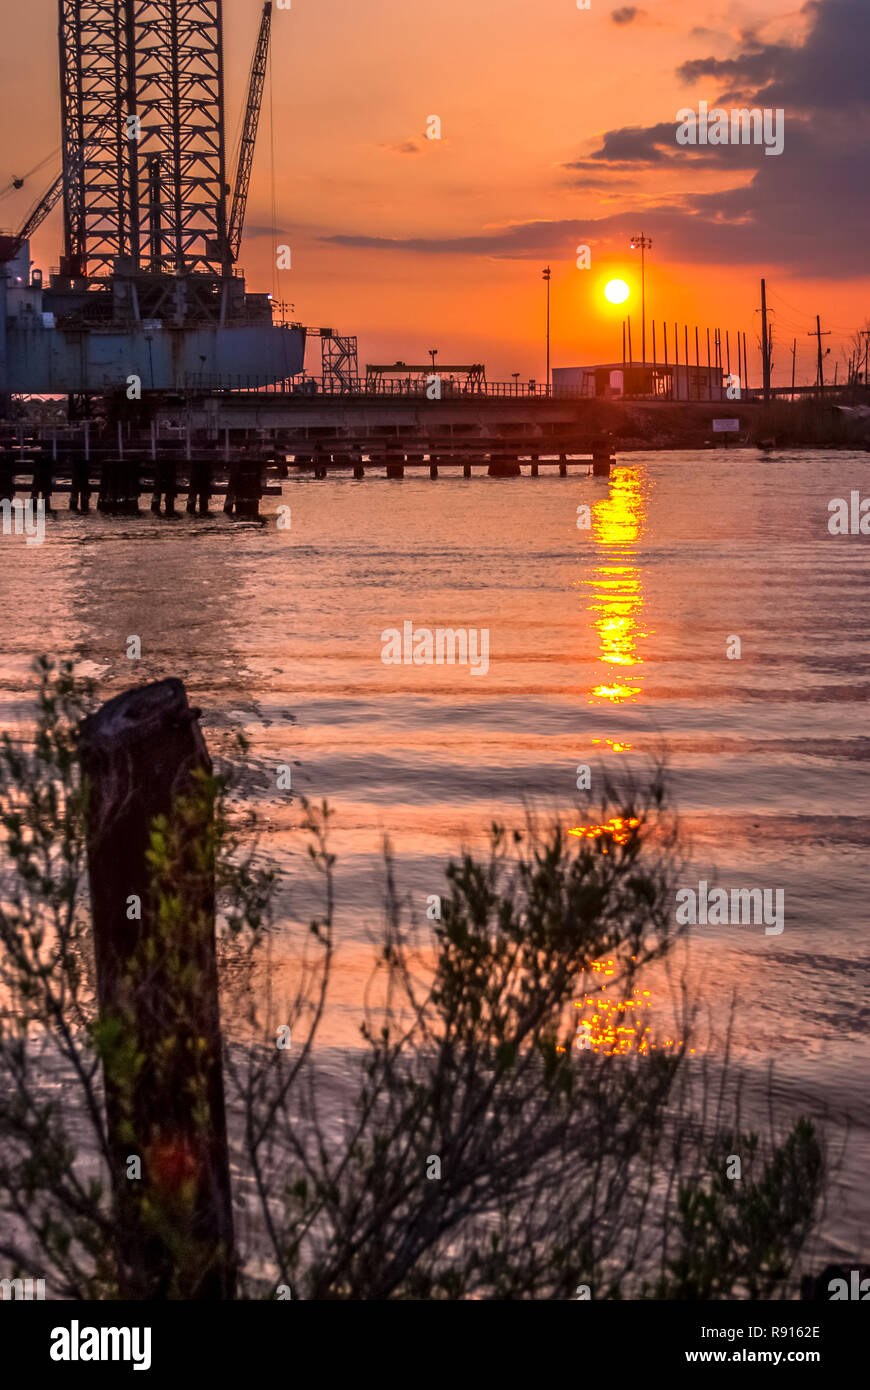 The sun sets over the East Pascagoula River and the CSX railroad bridge, March 18, 2010, in Pascagoula, Mississippi. Stock Photo